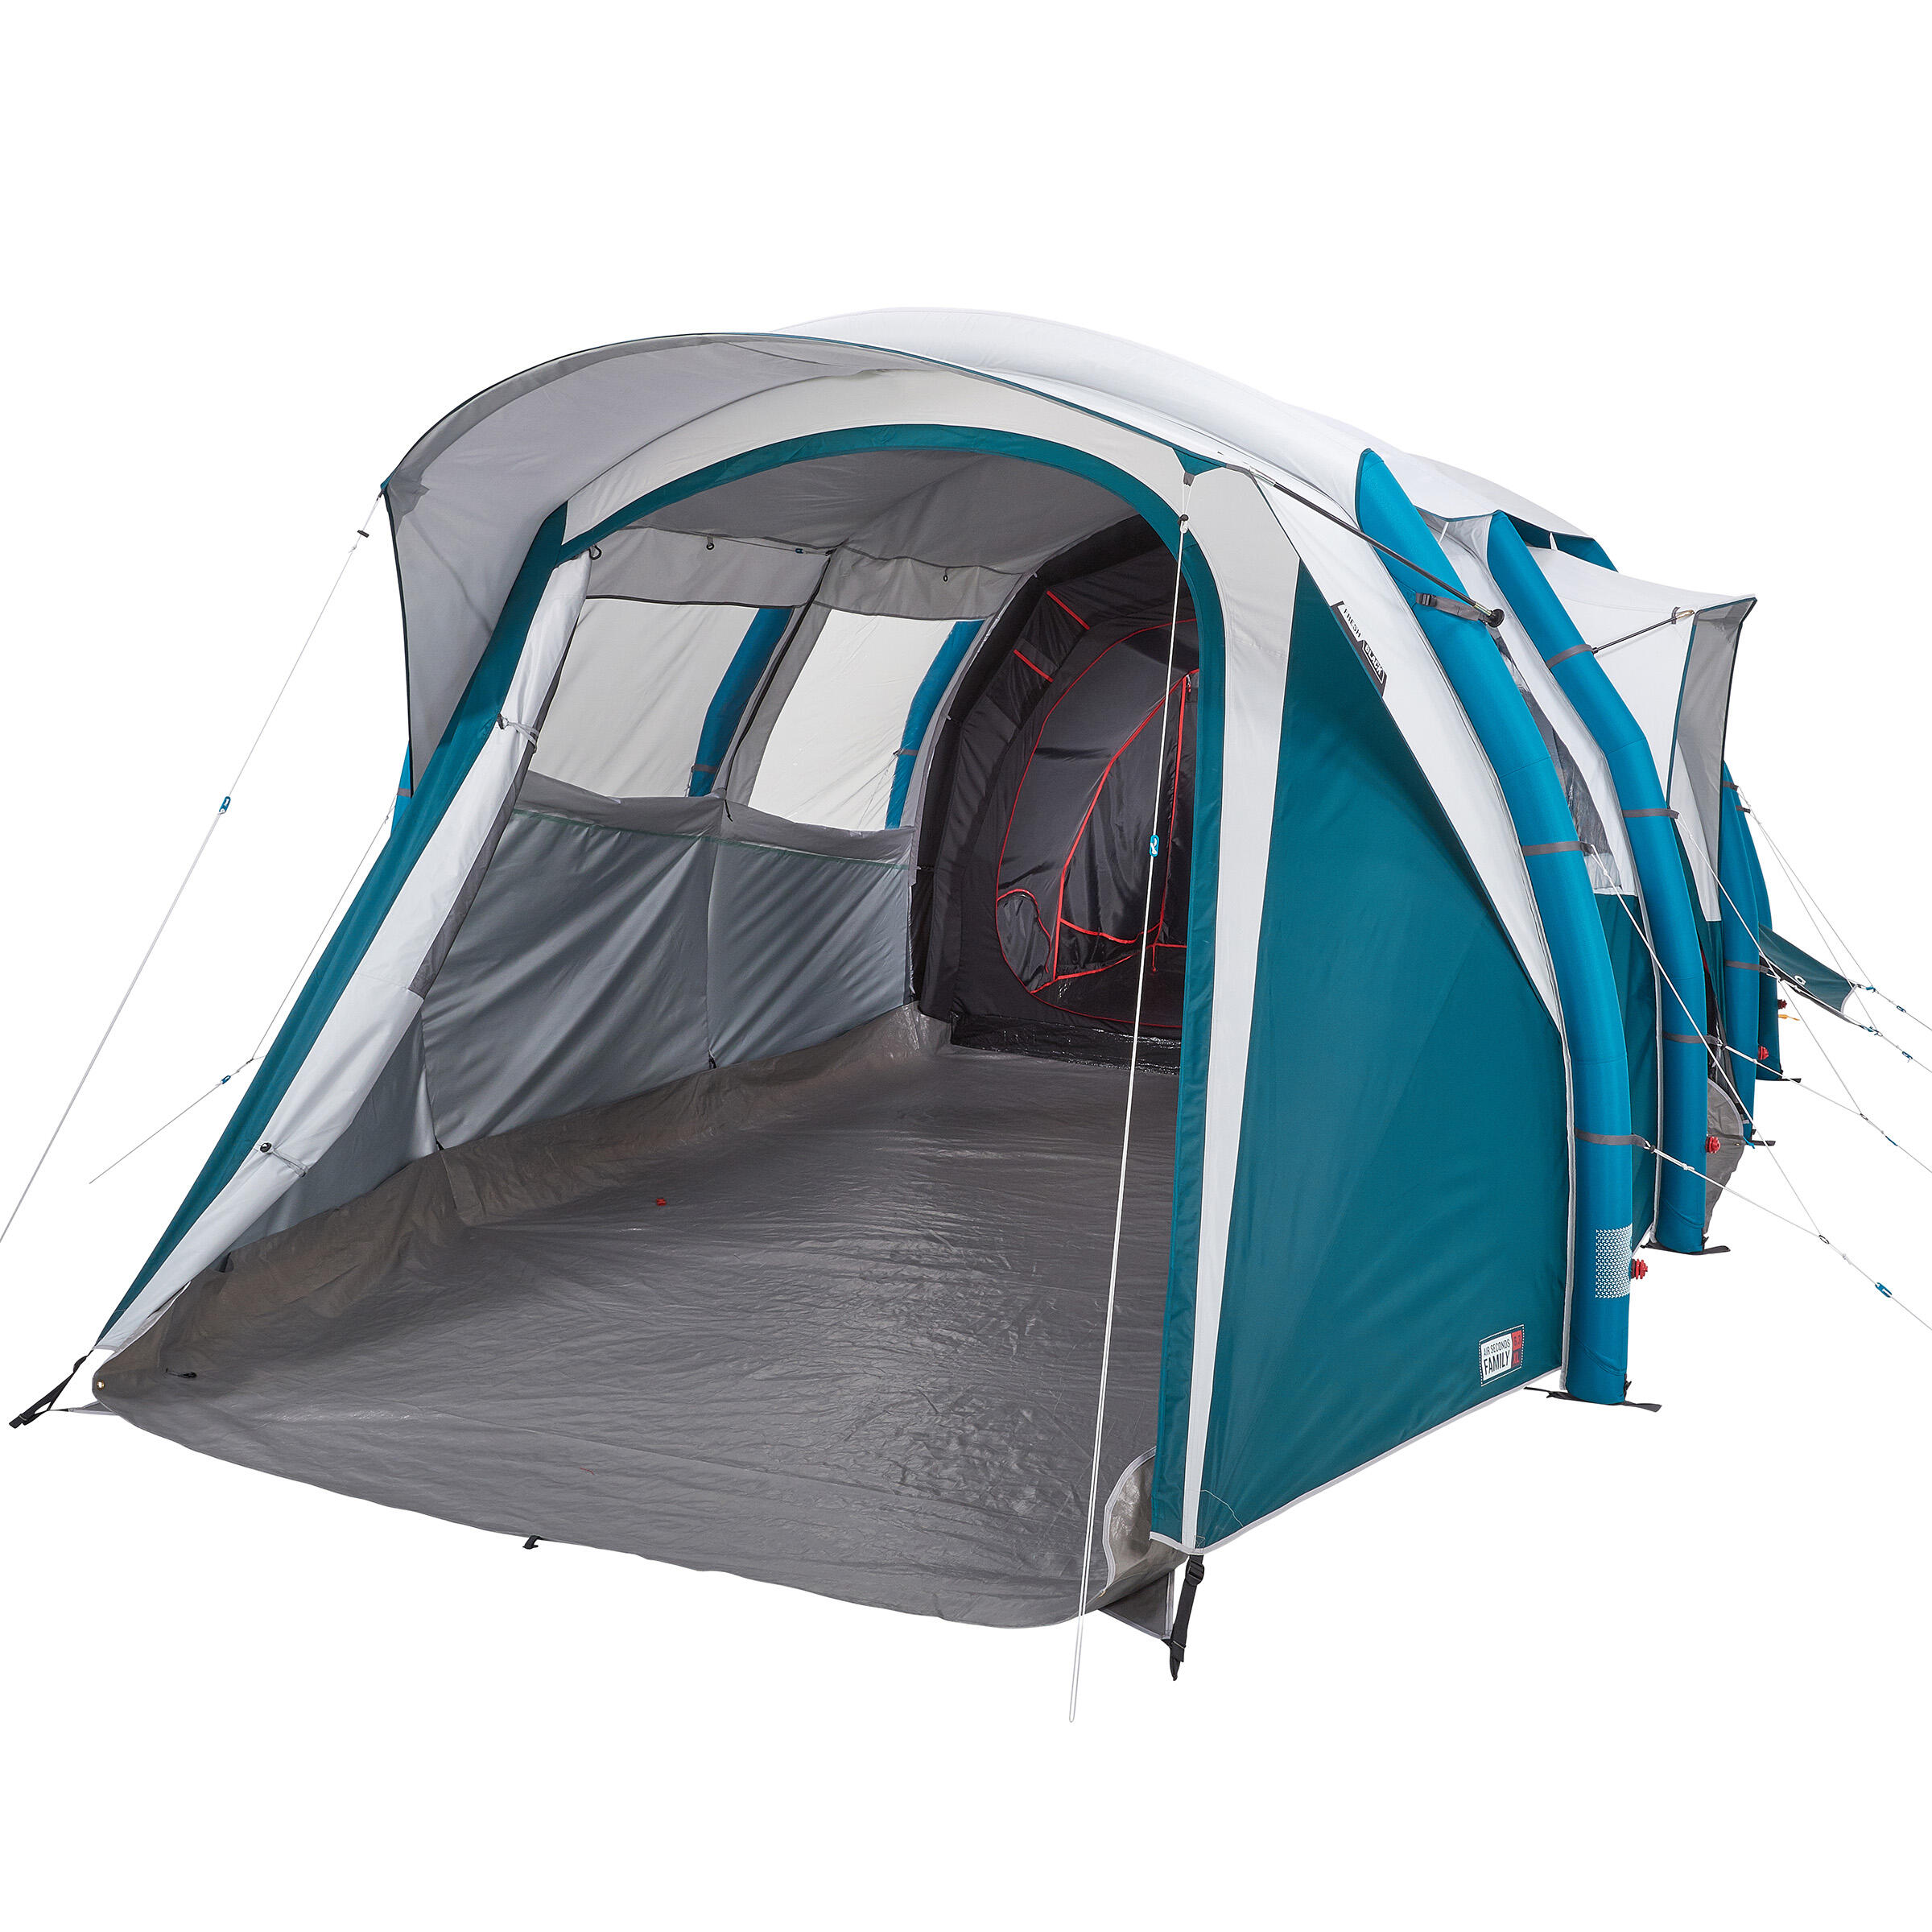 Family CAMPING Tents - Decathlon